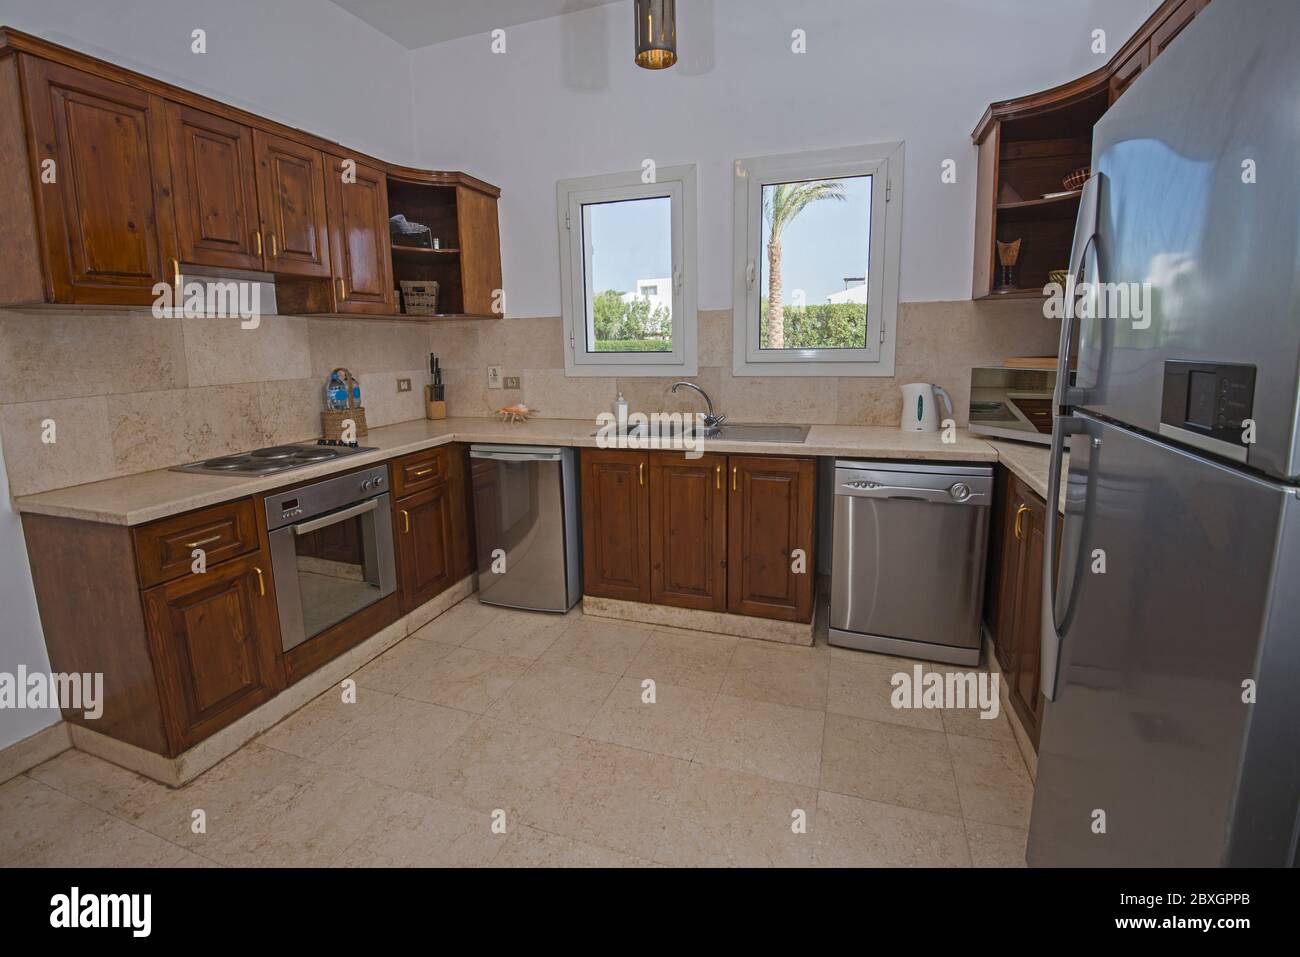 Kitchen In Luxury Villa Show Home Showing Interior Design Decor Furnishing With Appliances Stock Photo Alamy